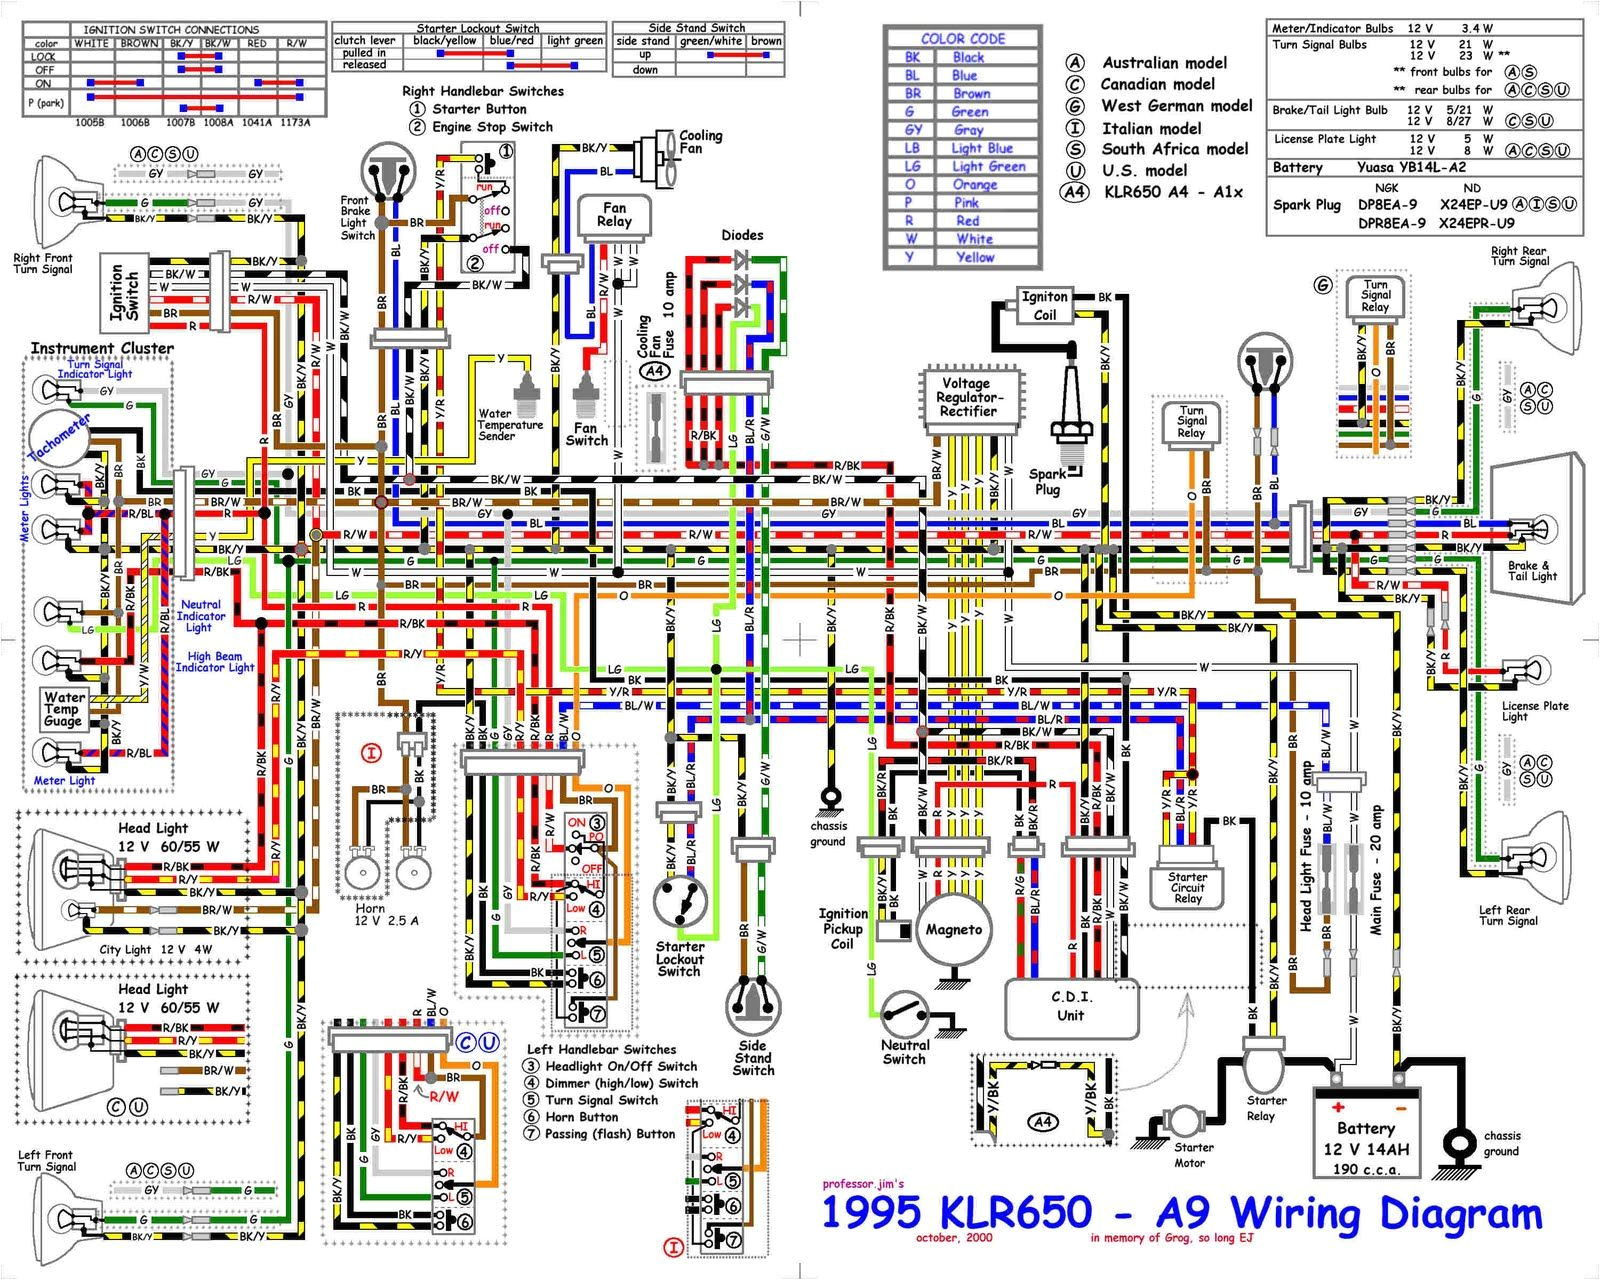 1998 chevy z71 wiring diagram wiring diagrams for 1998 chevy silverado wiring diagram 1998 chevy silverado electrical diagram